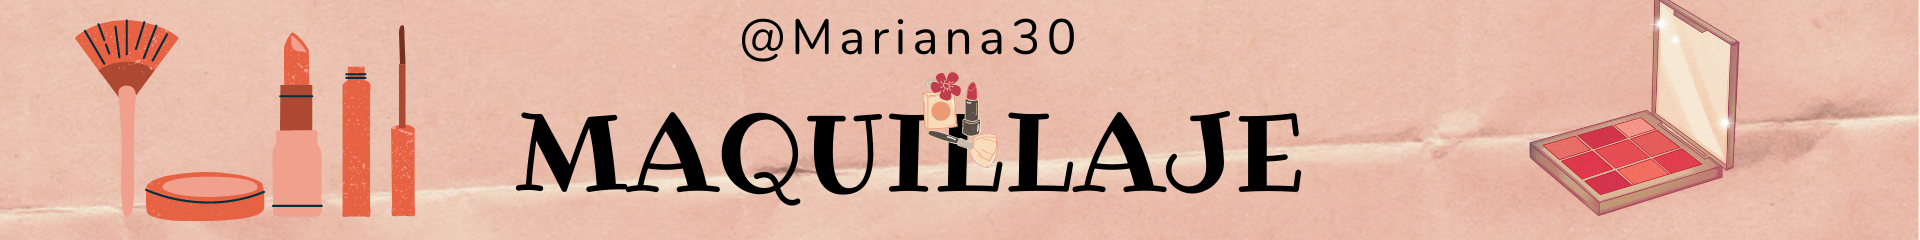 maquillaje (1).png